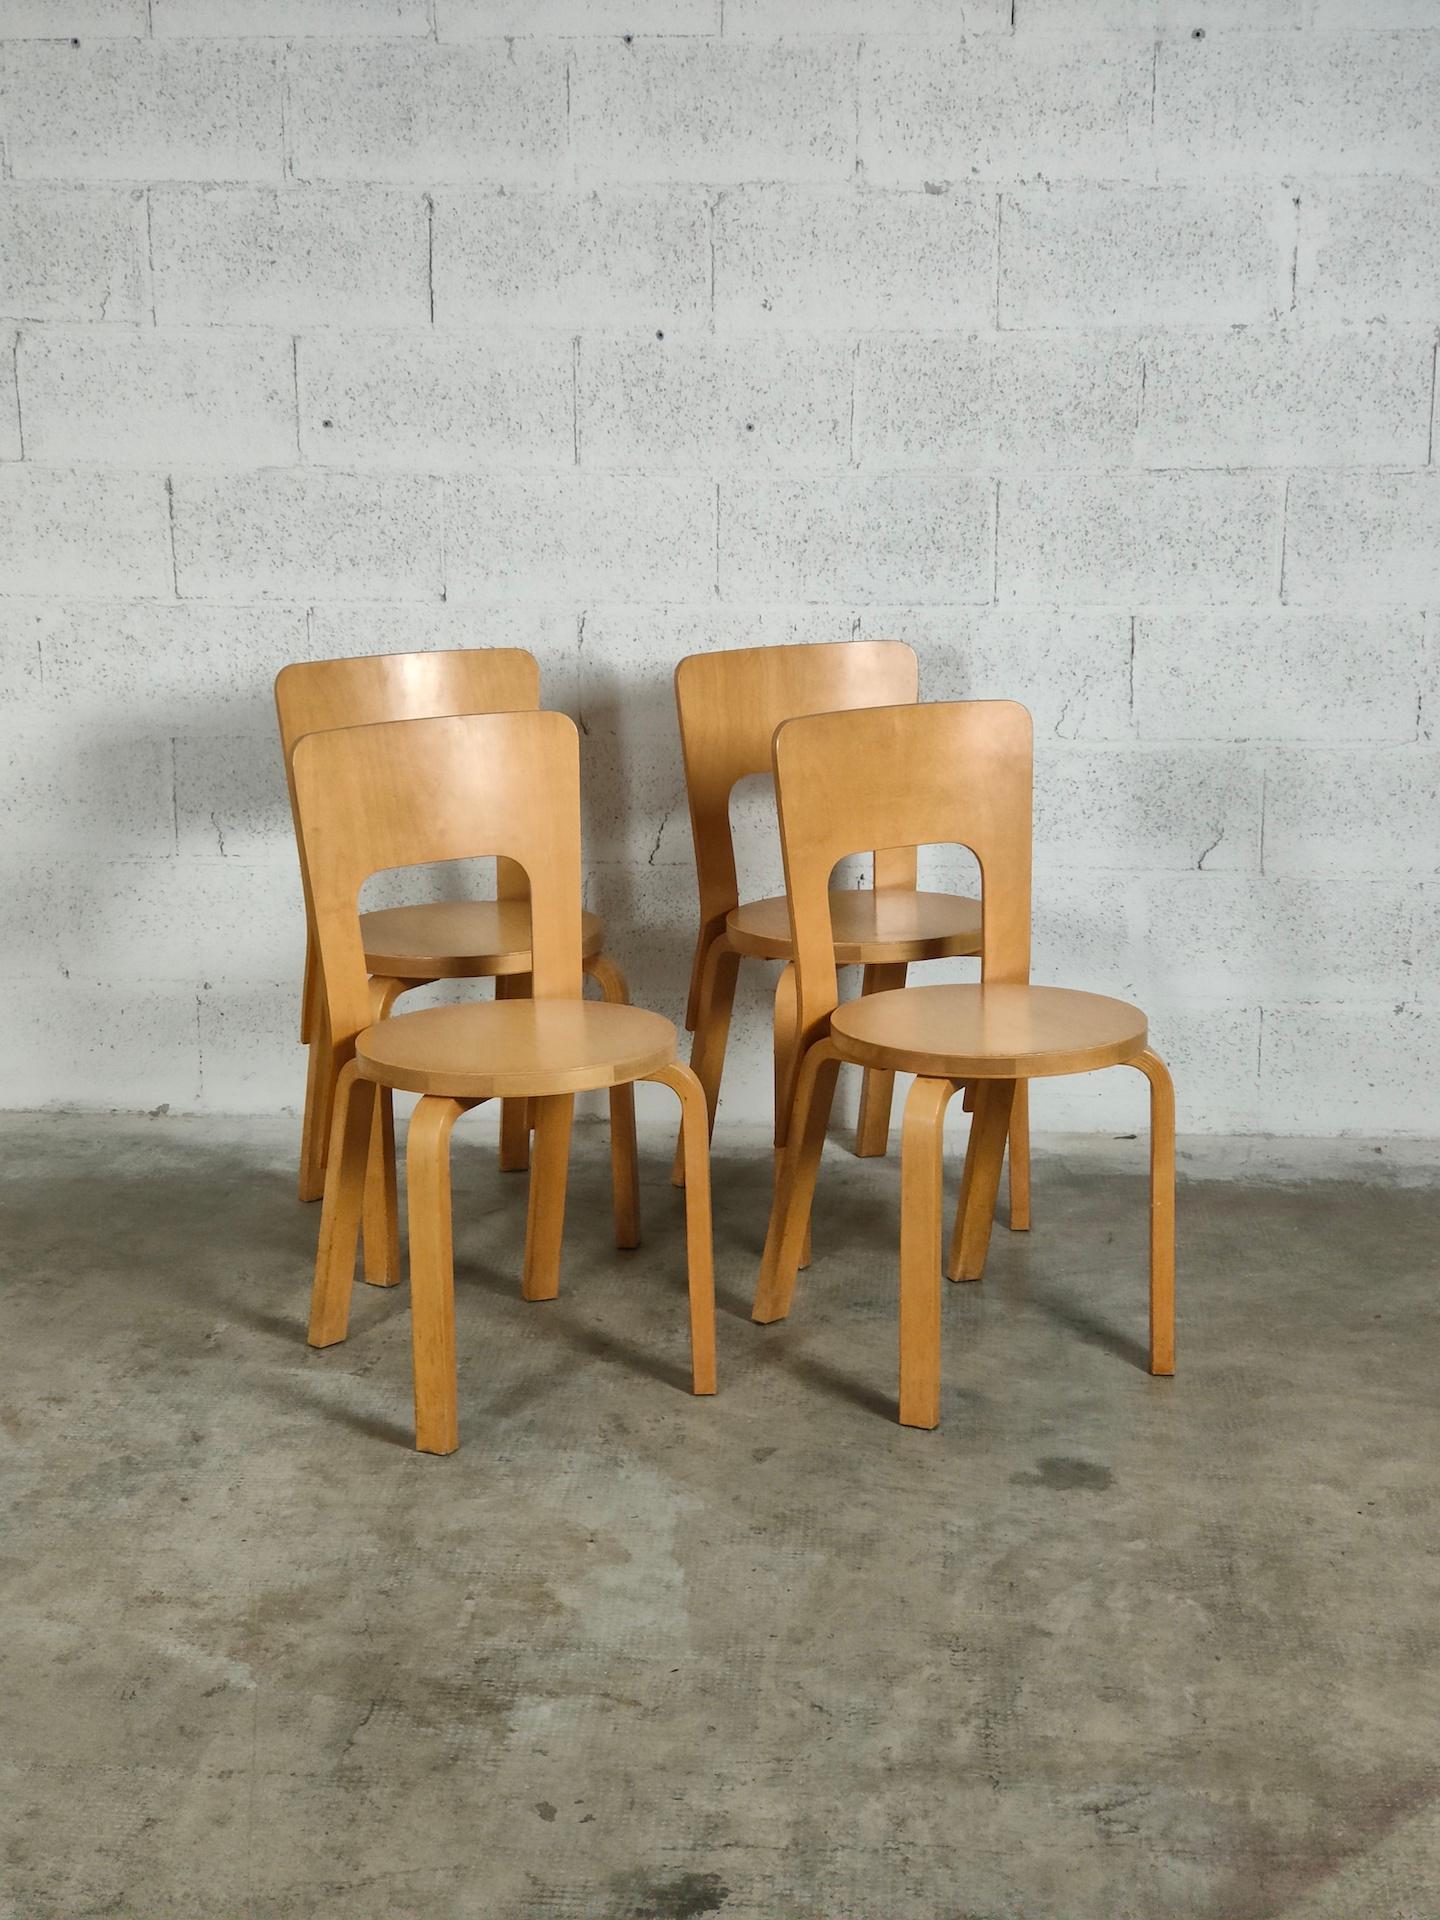 Set of 4 wooden dining chairs 66 model by Alvar Aalto for Artek 60s.

The unmistakable chair 66 by Artek is a chair with a classic and versatile design, designed in 1935 by the brilliant Finnish designer Alvar Aalto.
Appreciated for its simple